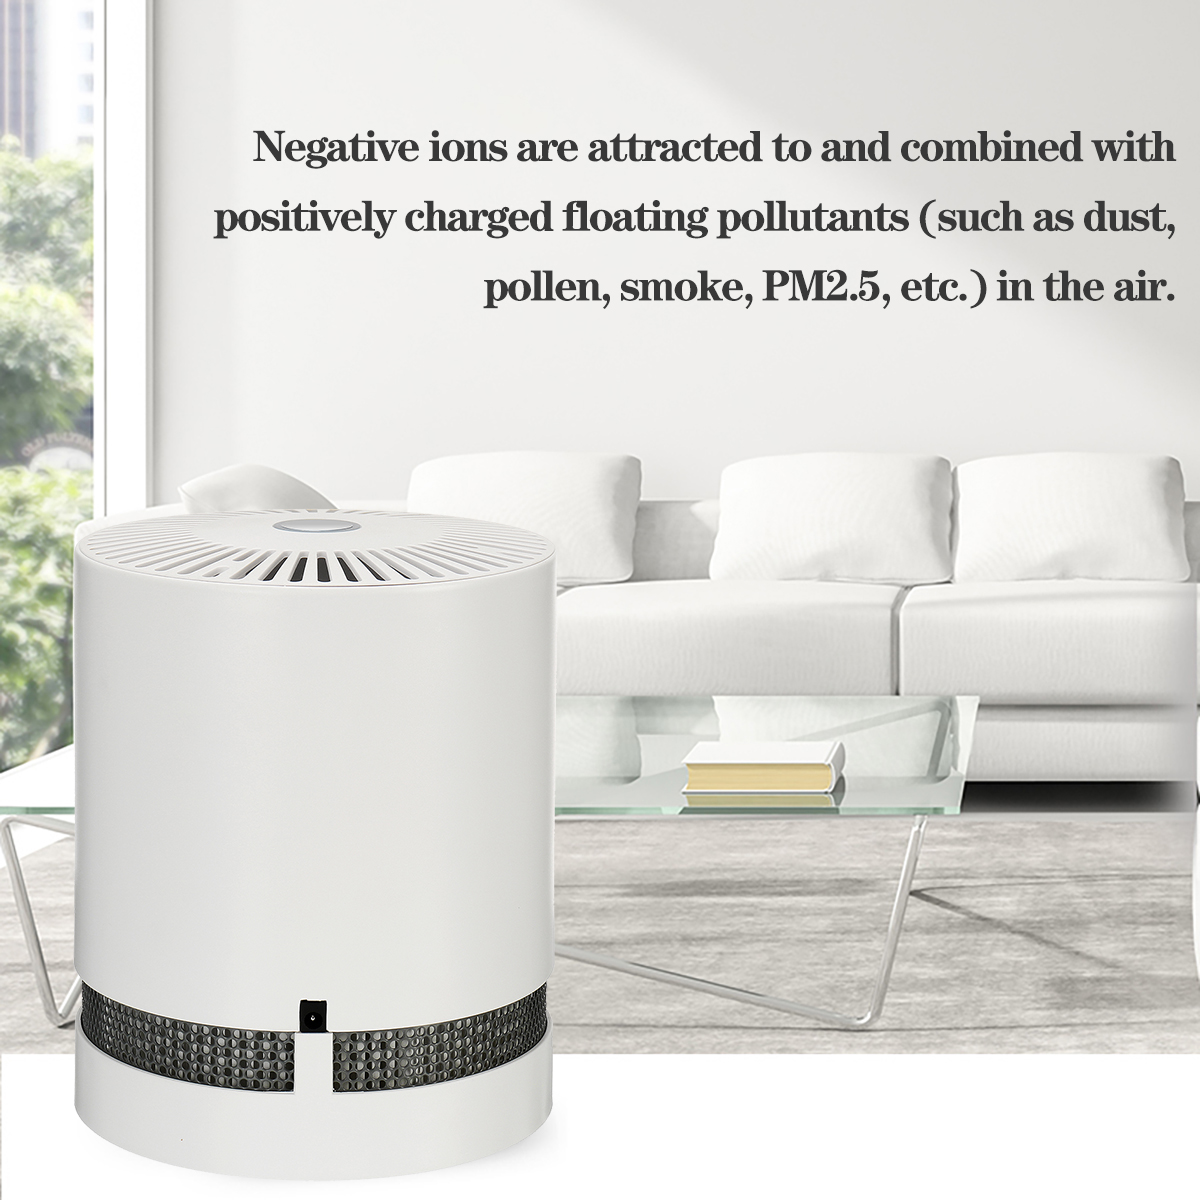 Negative-Ion-Air-Purifier-HEPA-Filter-Desktop-Air-Cleaner-For-Home-Office-Car-1631954-3